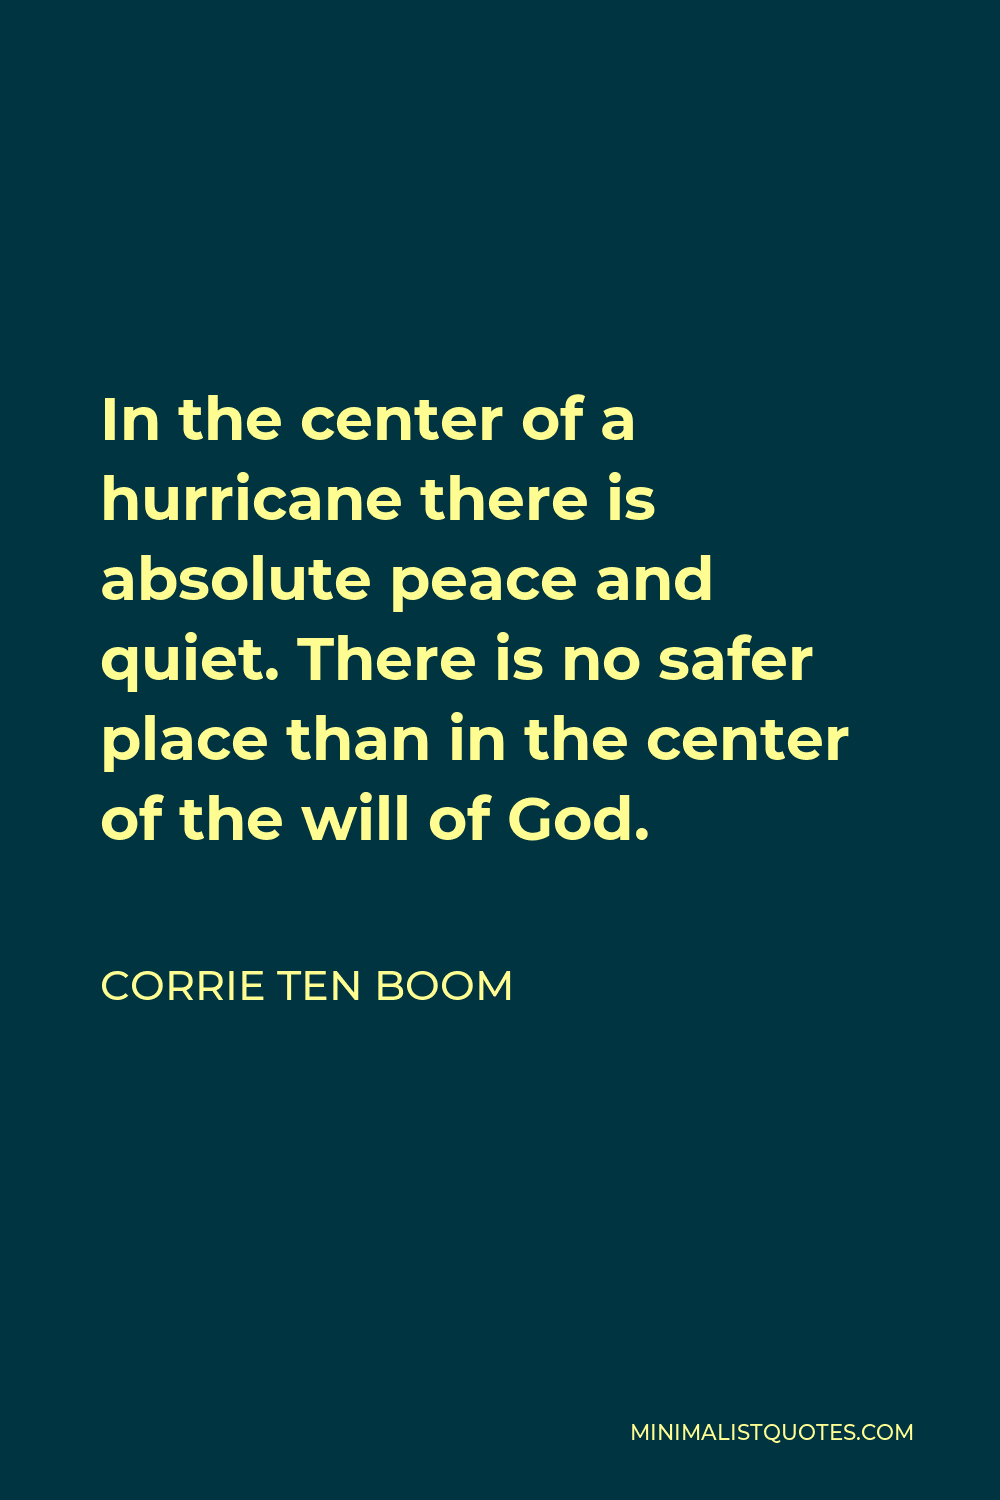 Corrie ten Boom Quote - In the center of a hurricane there is absolute peace and quiet. There is no safer place than in the center of the will of God.